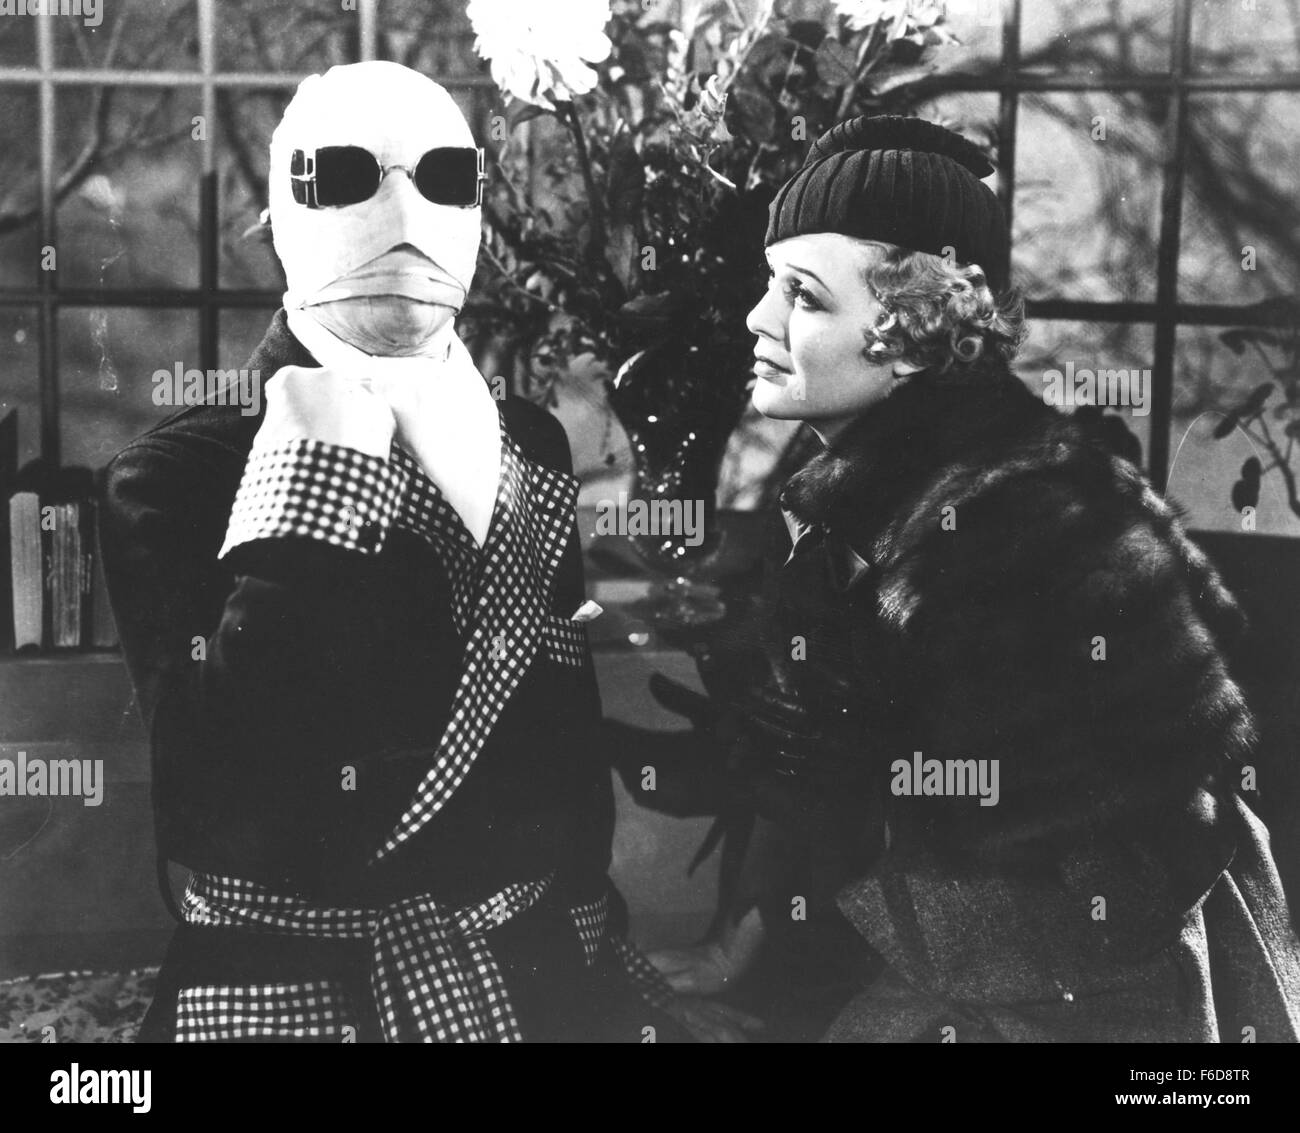 RELEASE DATE: November 13, 1933. MOVIE TITLE: The Invisible Man. STUDIO:  Universal Pictures. PLOT: A mysterious man, whose head is completely  covered in bandages, wants a room. The proprietors of the pub